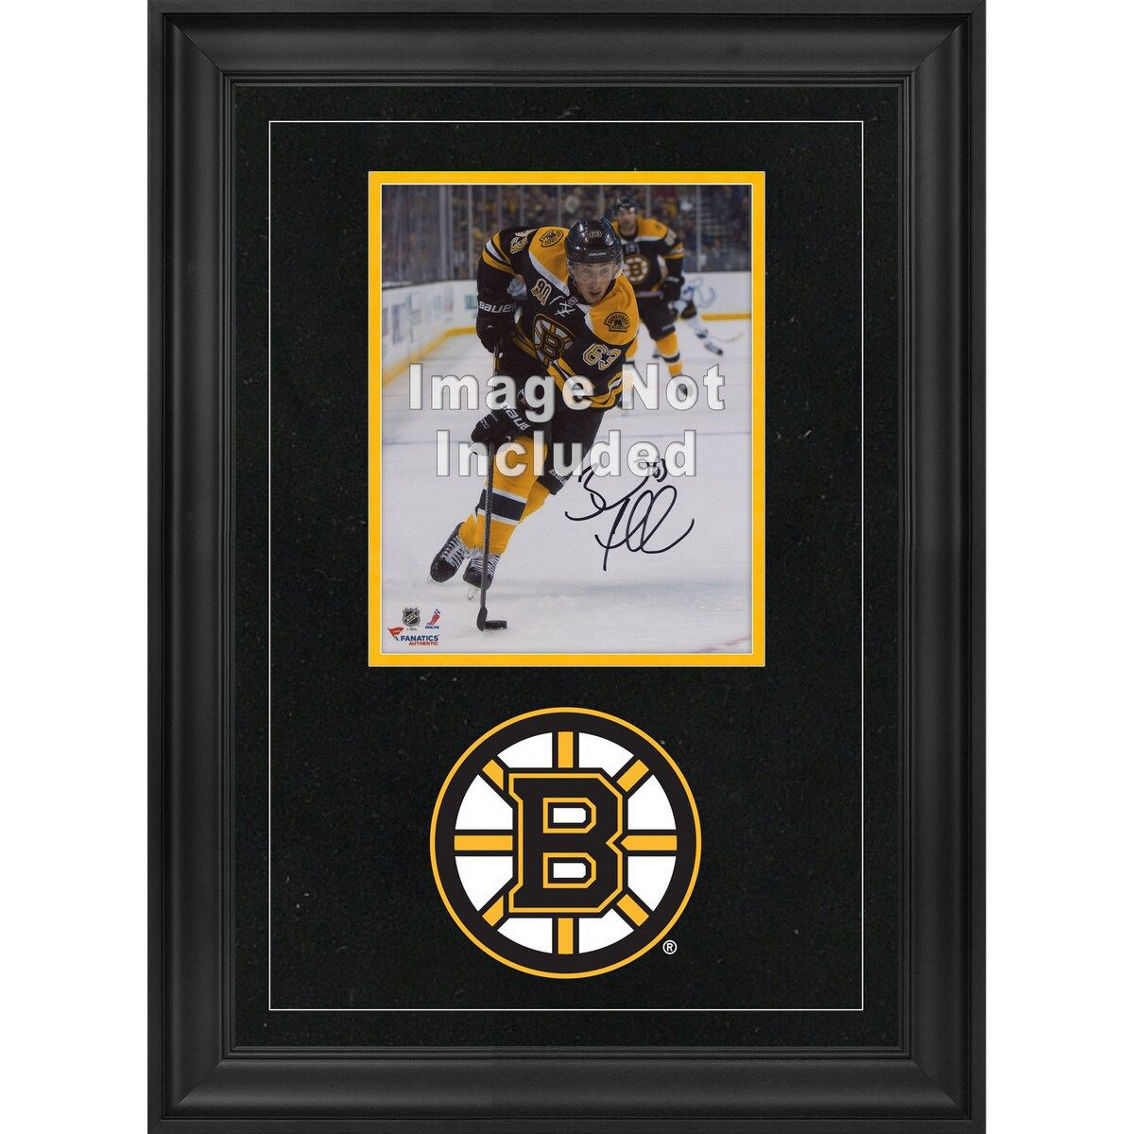 Fanatics Authentic Boston Bruins 8'' x 10'' Deluxe Vertical Photograph Frame with Team Logo - Image 2 of 2